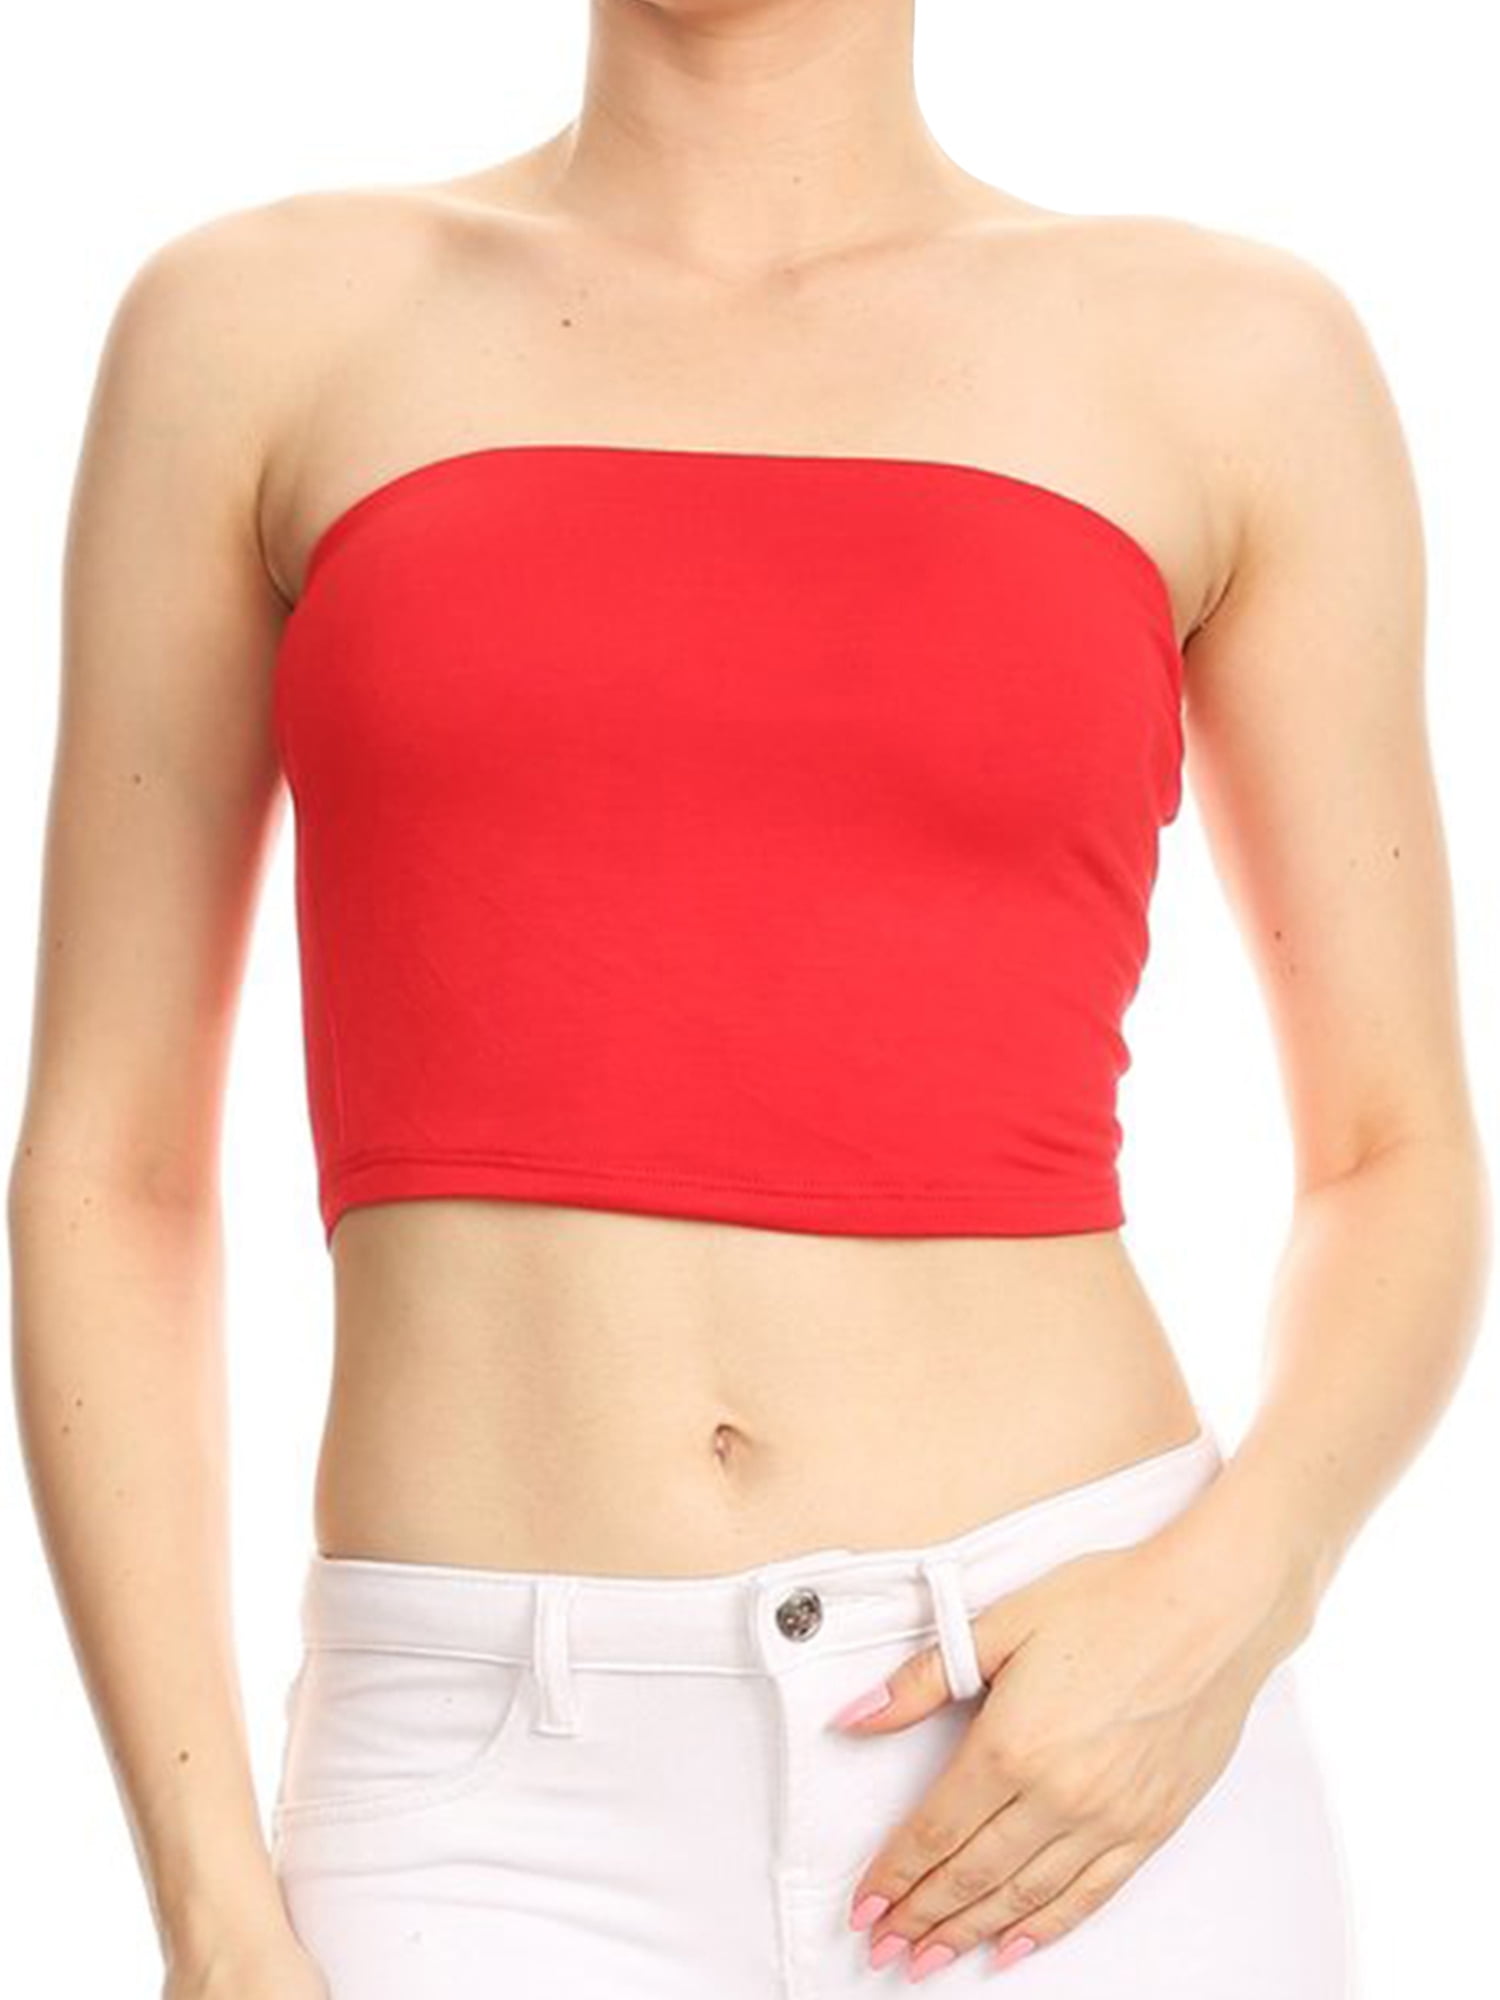 lol Tidsplan Bytte Imagenation Double Front Strapless Cropped Tube Top, Large, Red -  Walmart.com